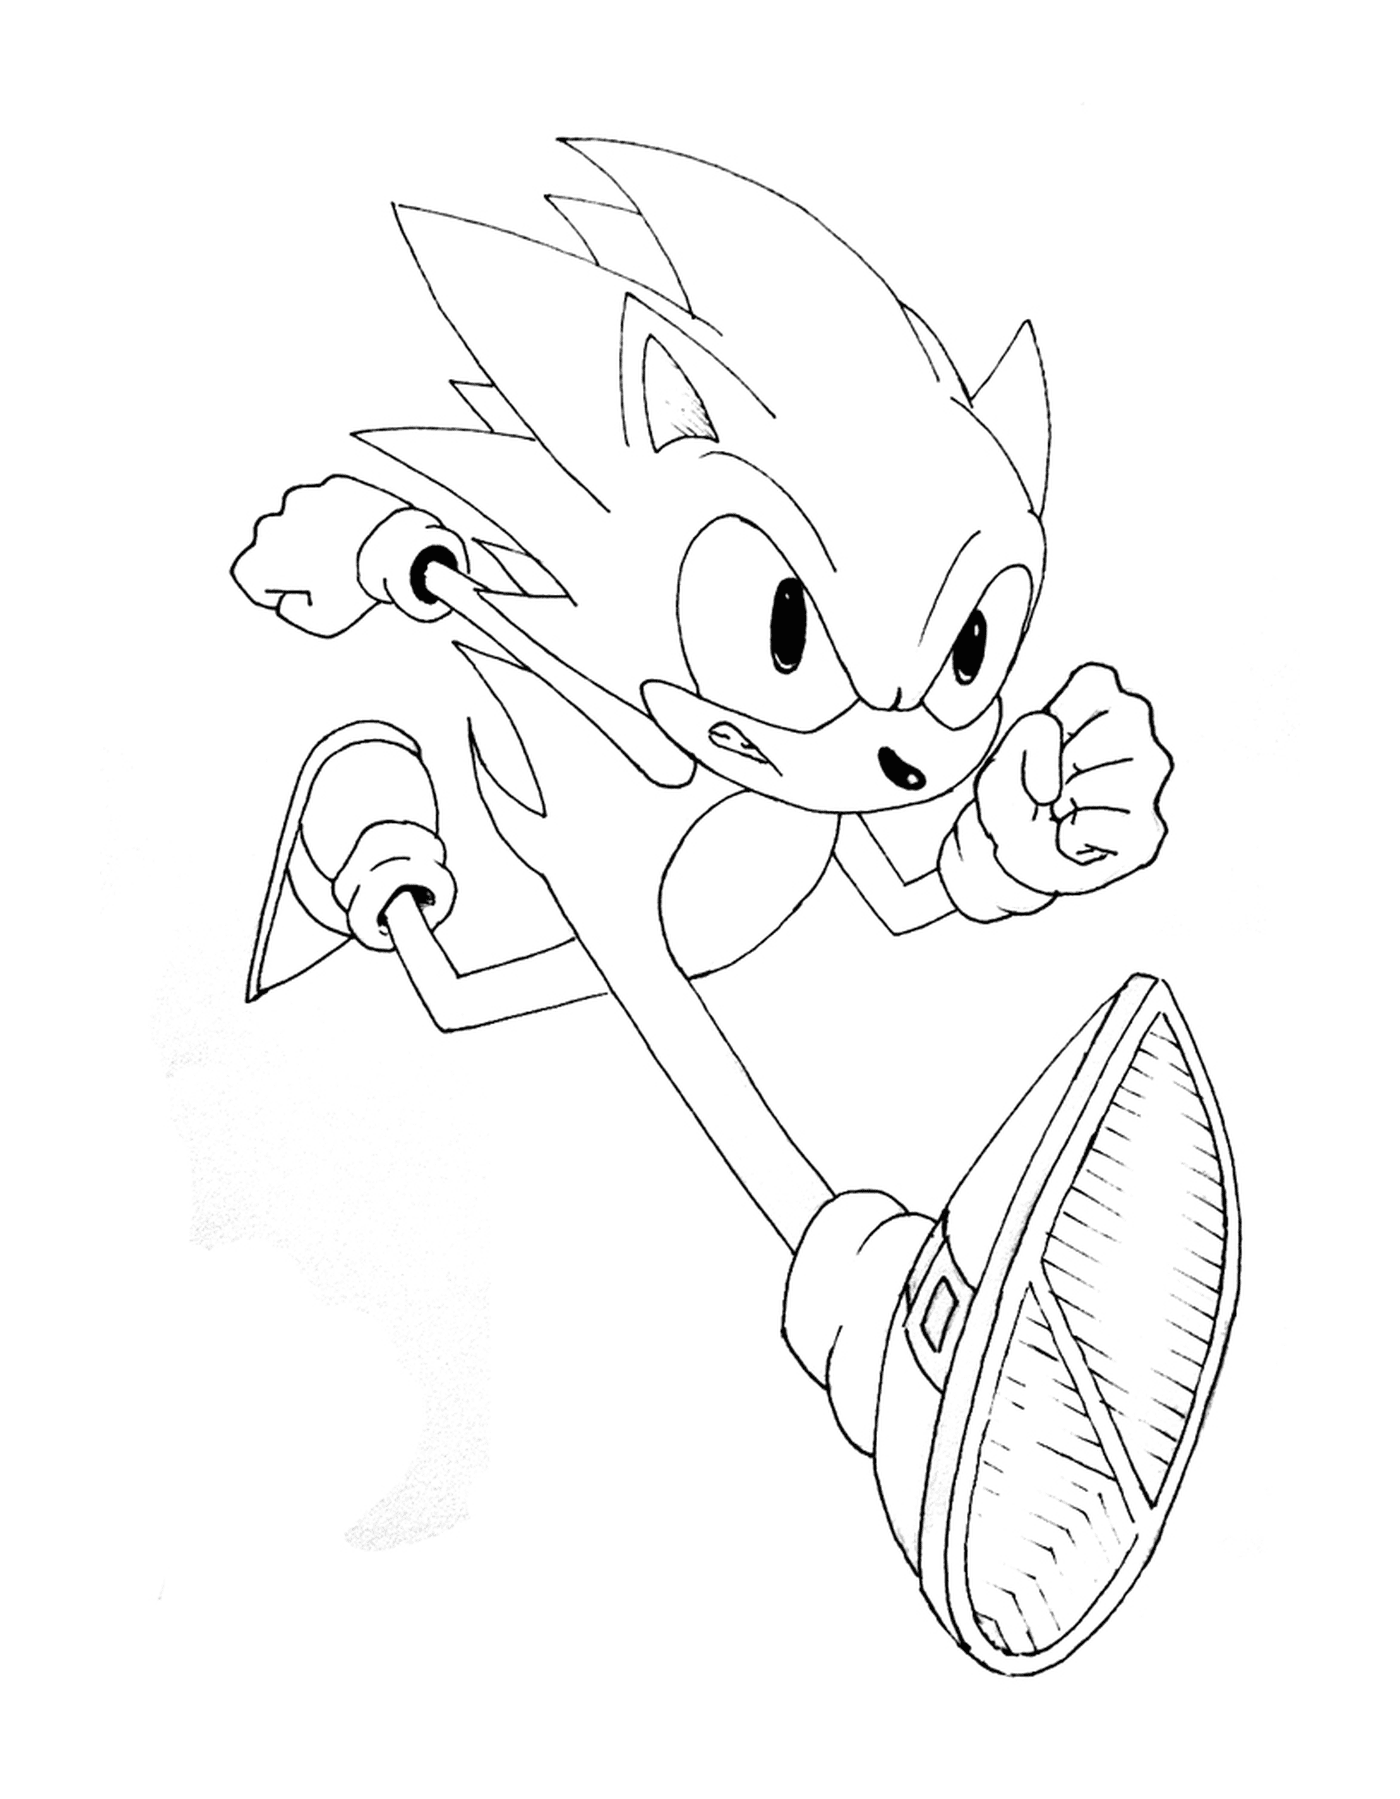  Fast and dynamic Sonic 